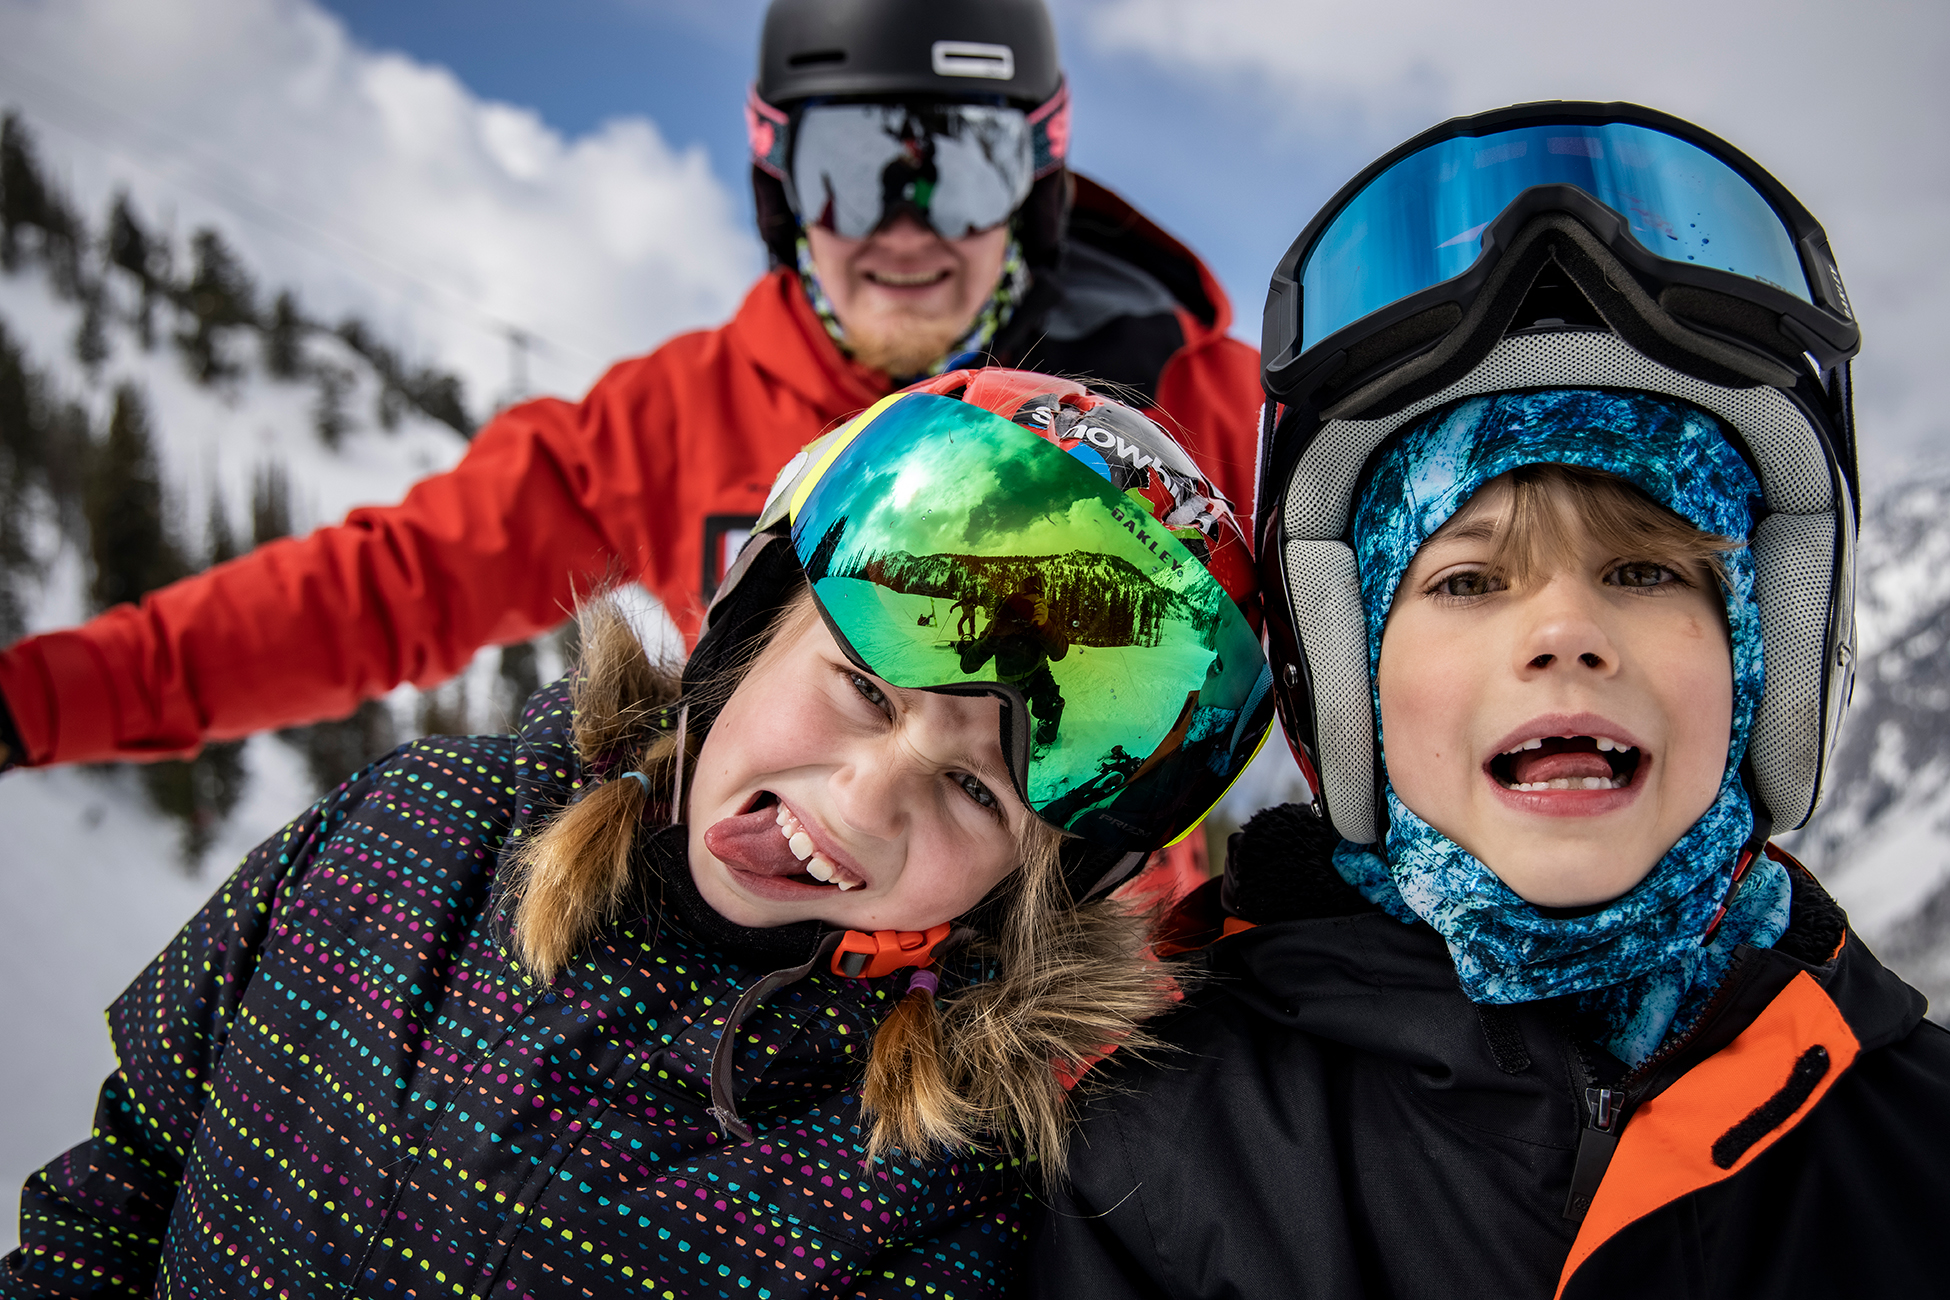 ski and snowboard lessons for teens and youth, Snowbird Utah